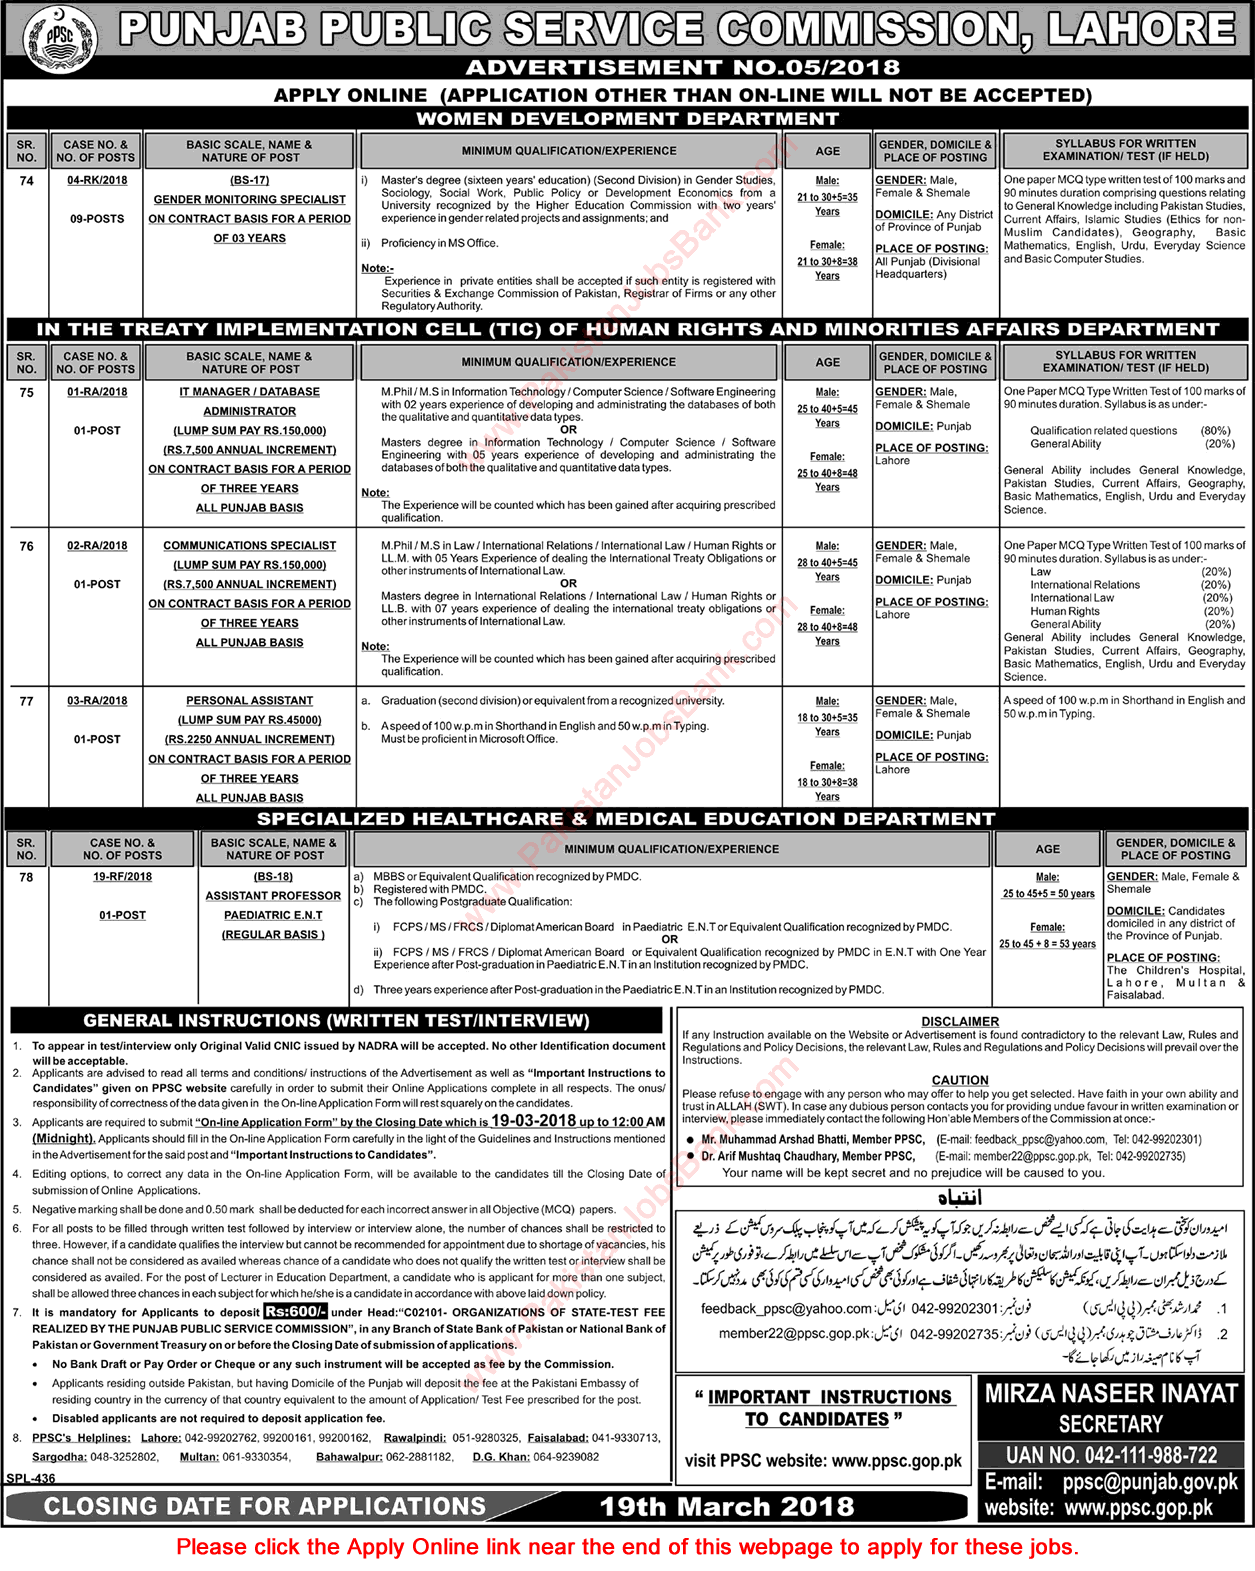 PPSC Jobs March 2018 Apply Online Consolidated Advertisement No 05/2018 5/2018 Latest